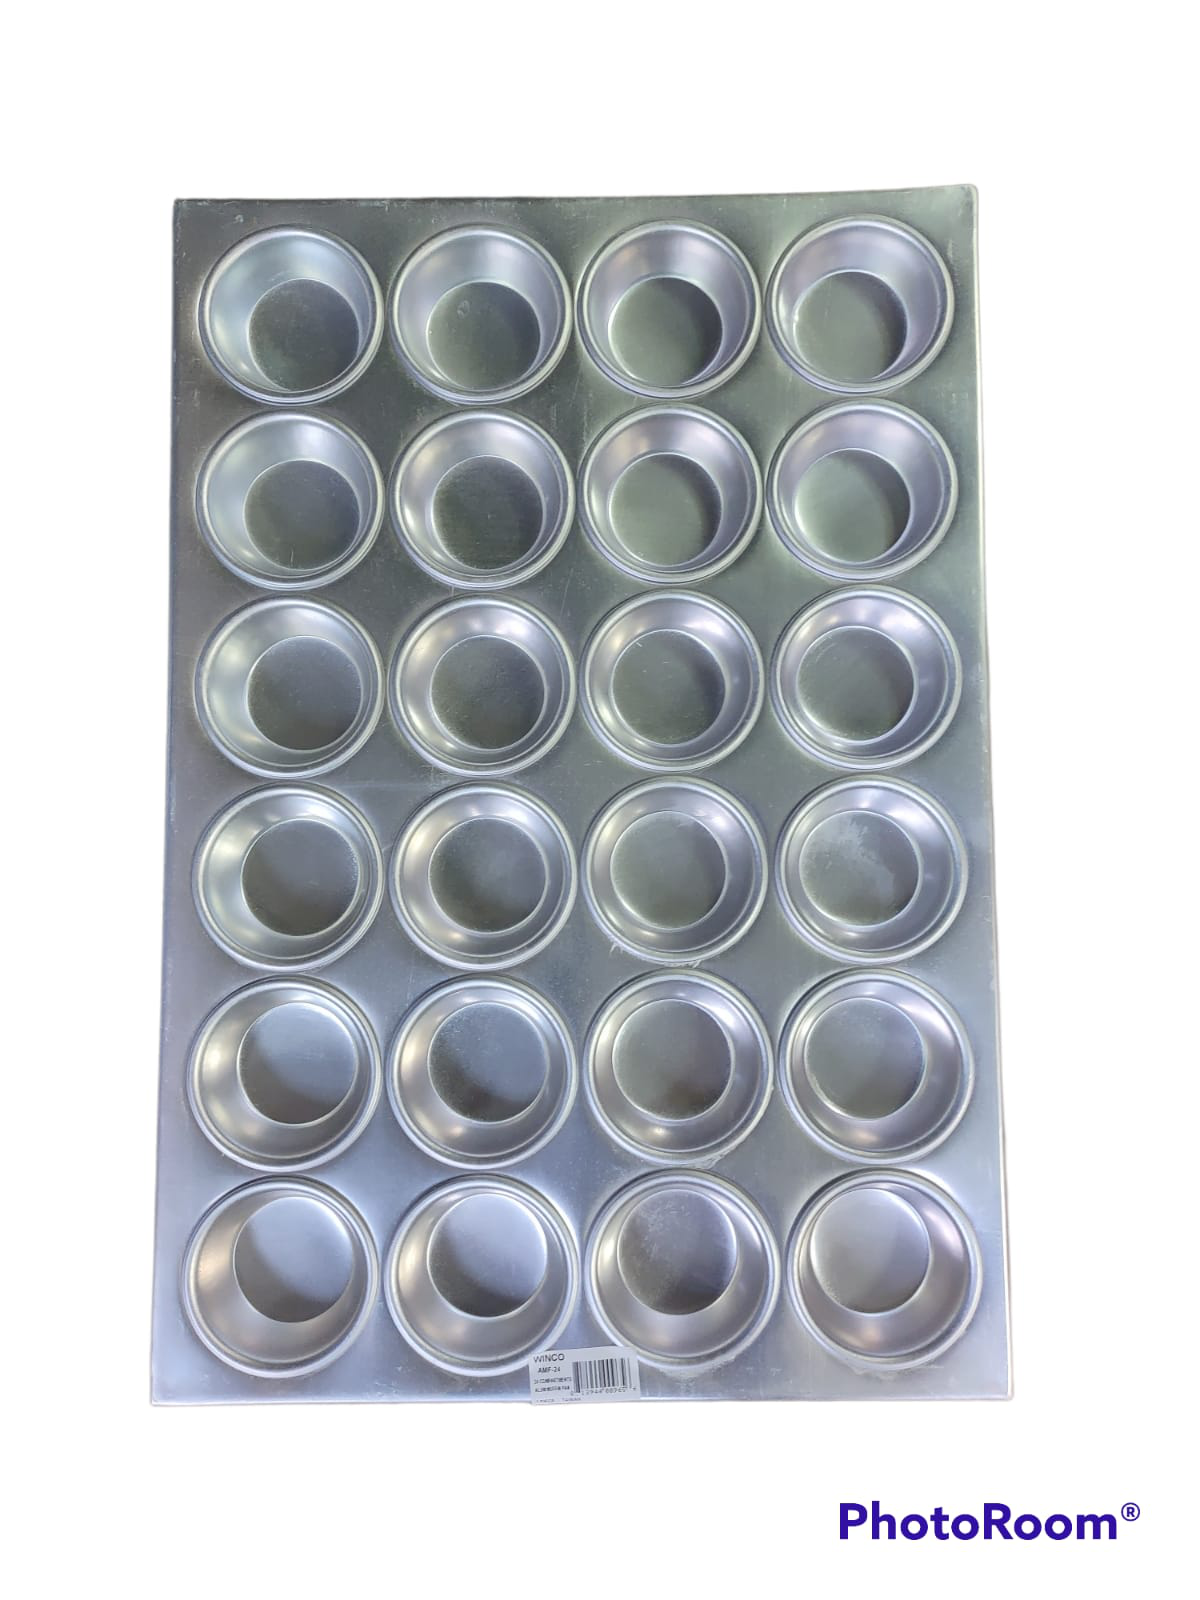 24 Cup Muffin Pan, Non-stick, 3 oz., Aluminum – Bakers Authority